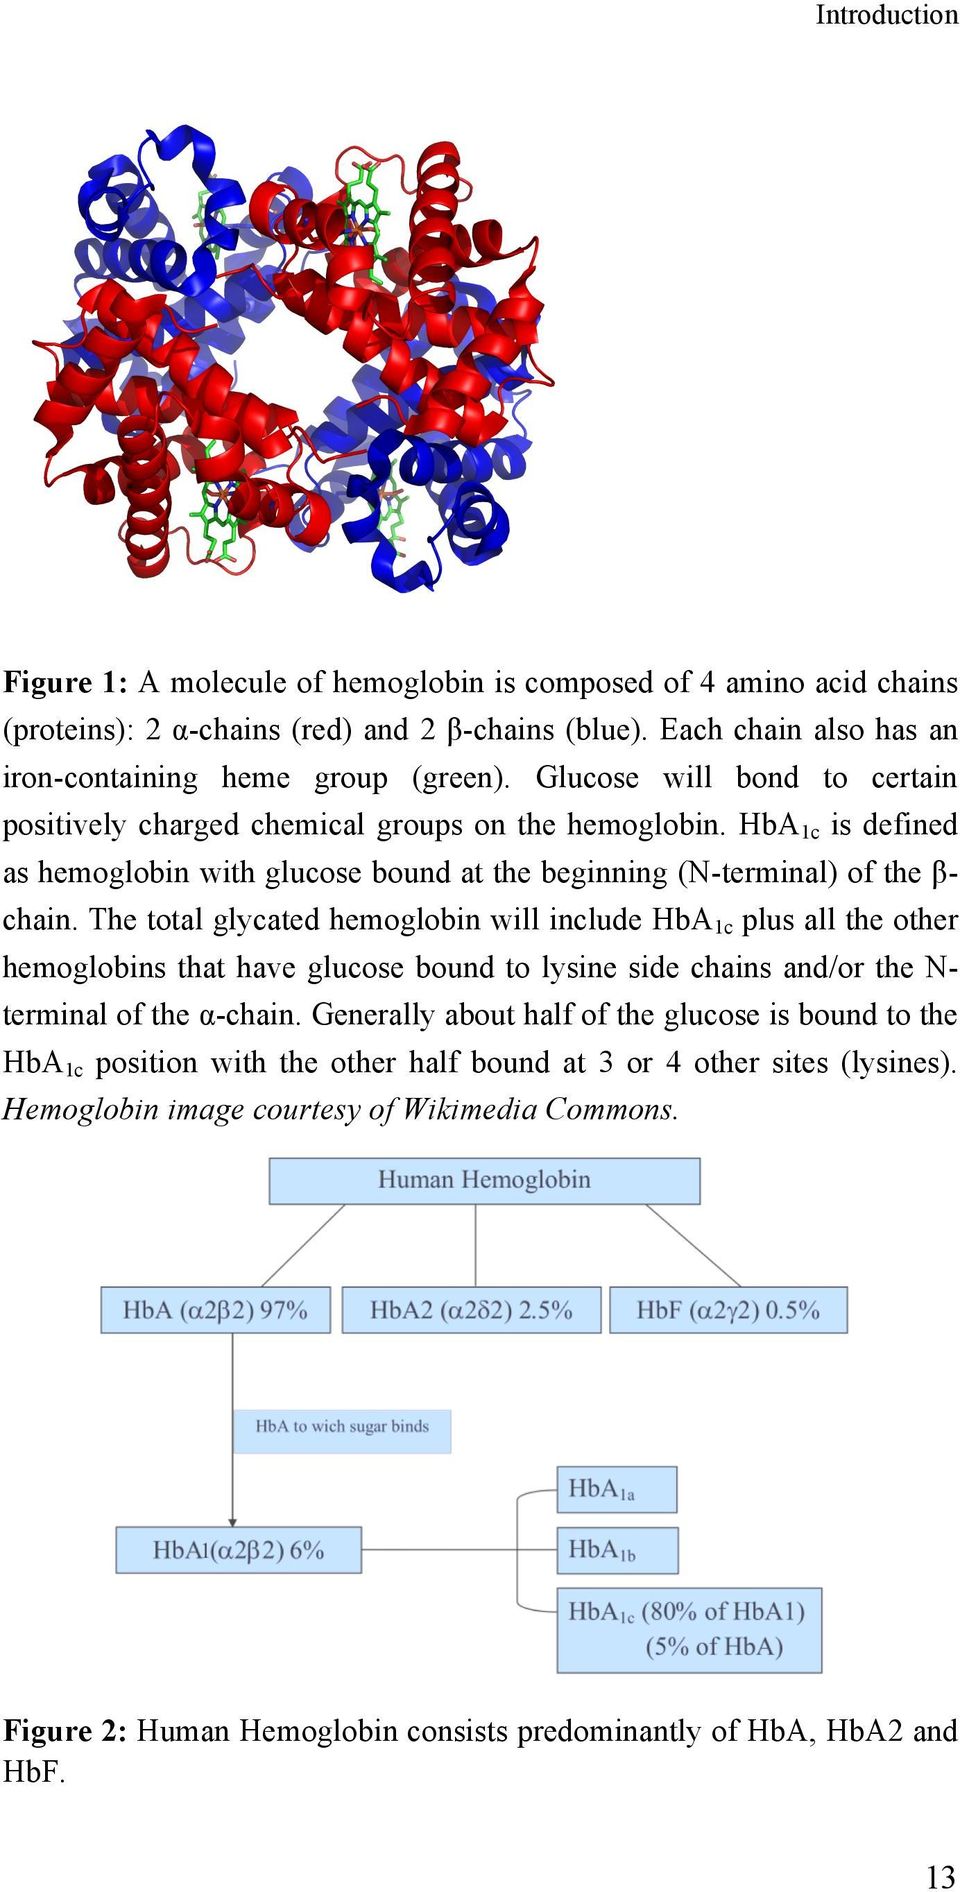 The total glycated hemoglobin will include HbA1c plus all the other hemoglobins that have glucose bound to lysine side chains and/or the Nterminal of the α-chain.